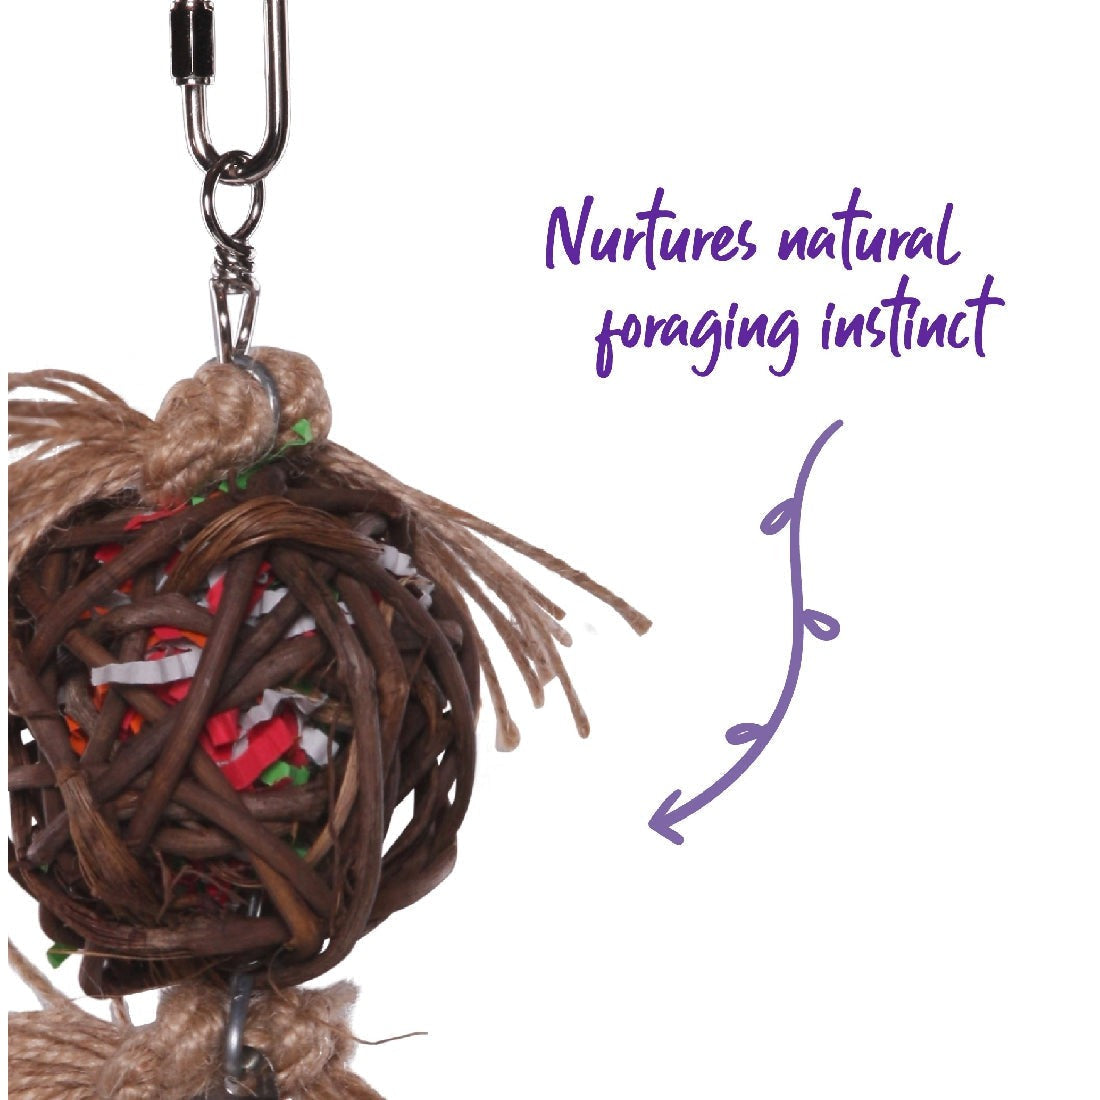 Hanging woven vine ball bird toy with colorful paper shreds inside.